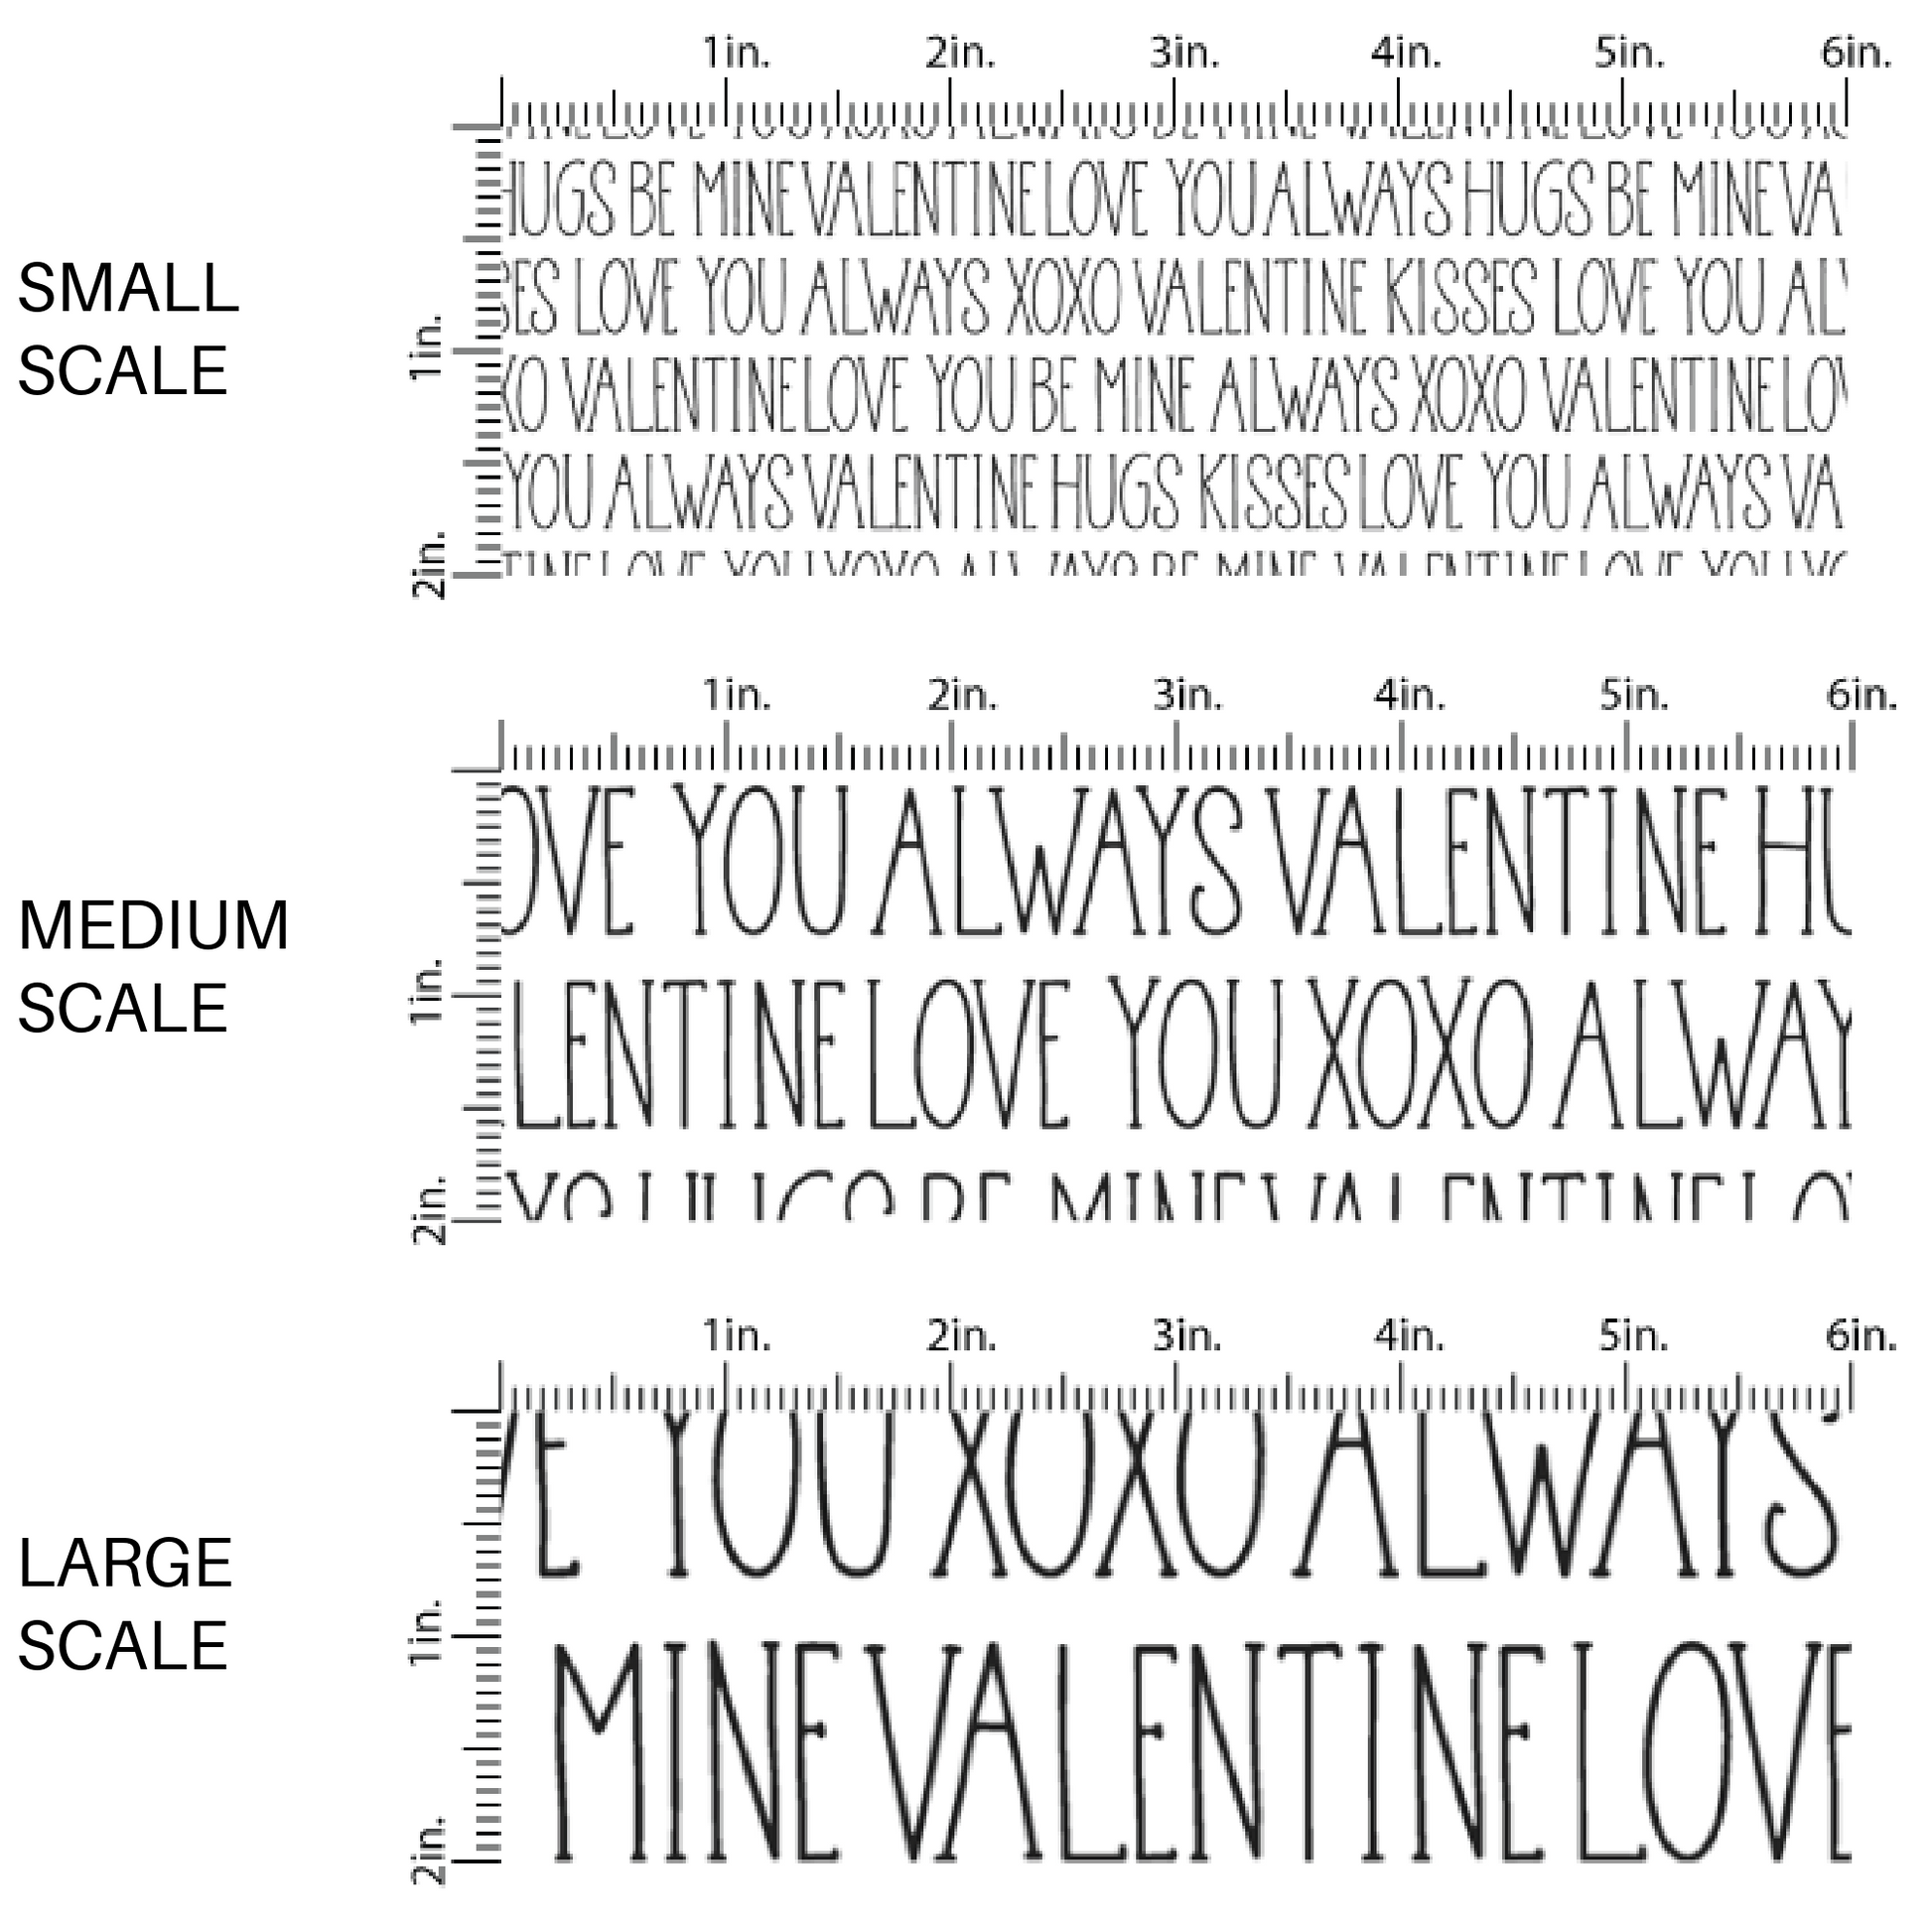 White fabric with black lettering and the words "Love You Always" image guide' Fabric scaling